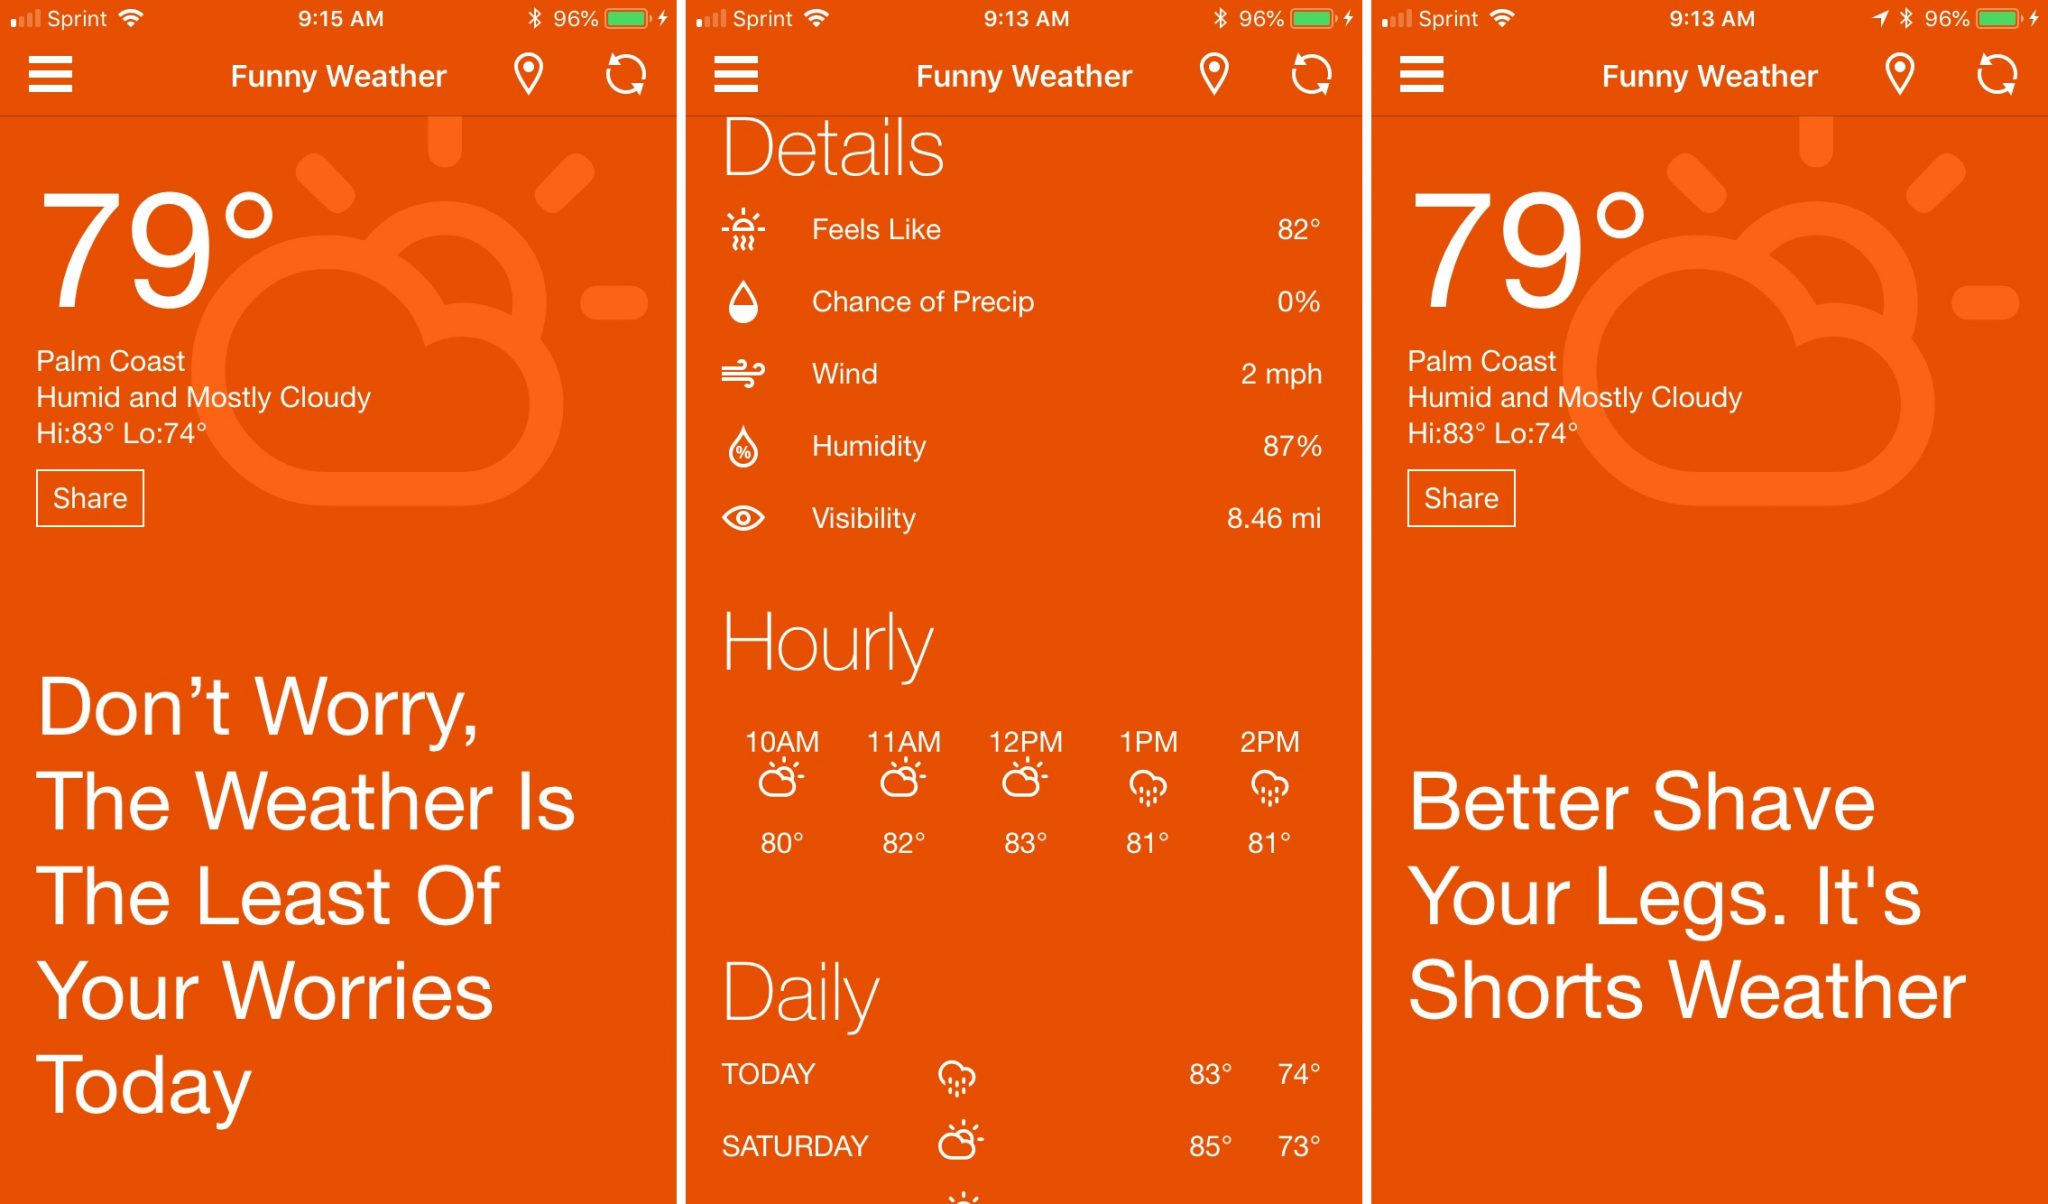 Funny weather apps for iOS